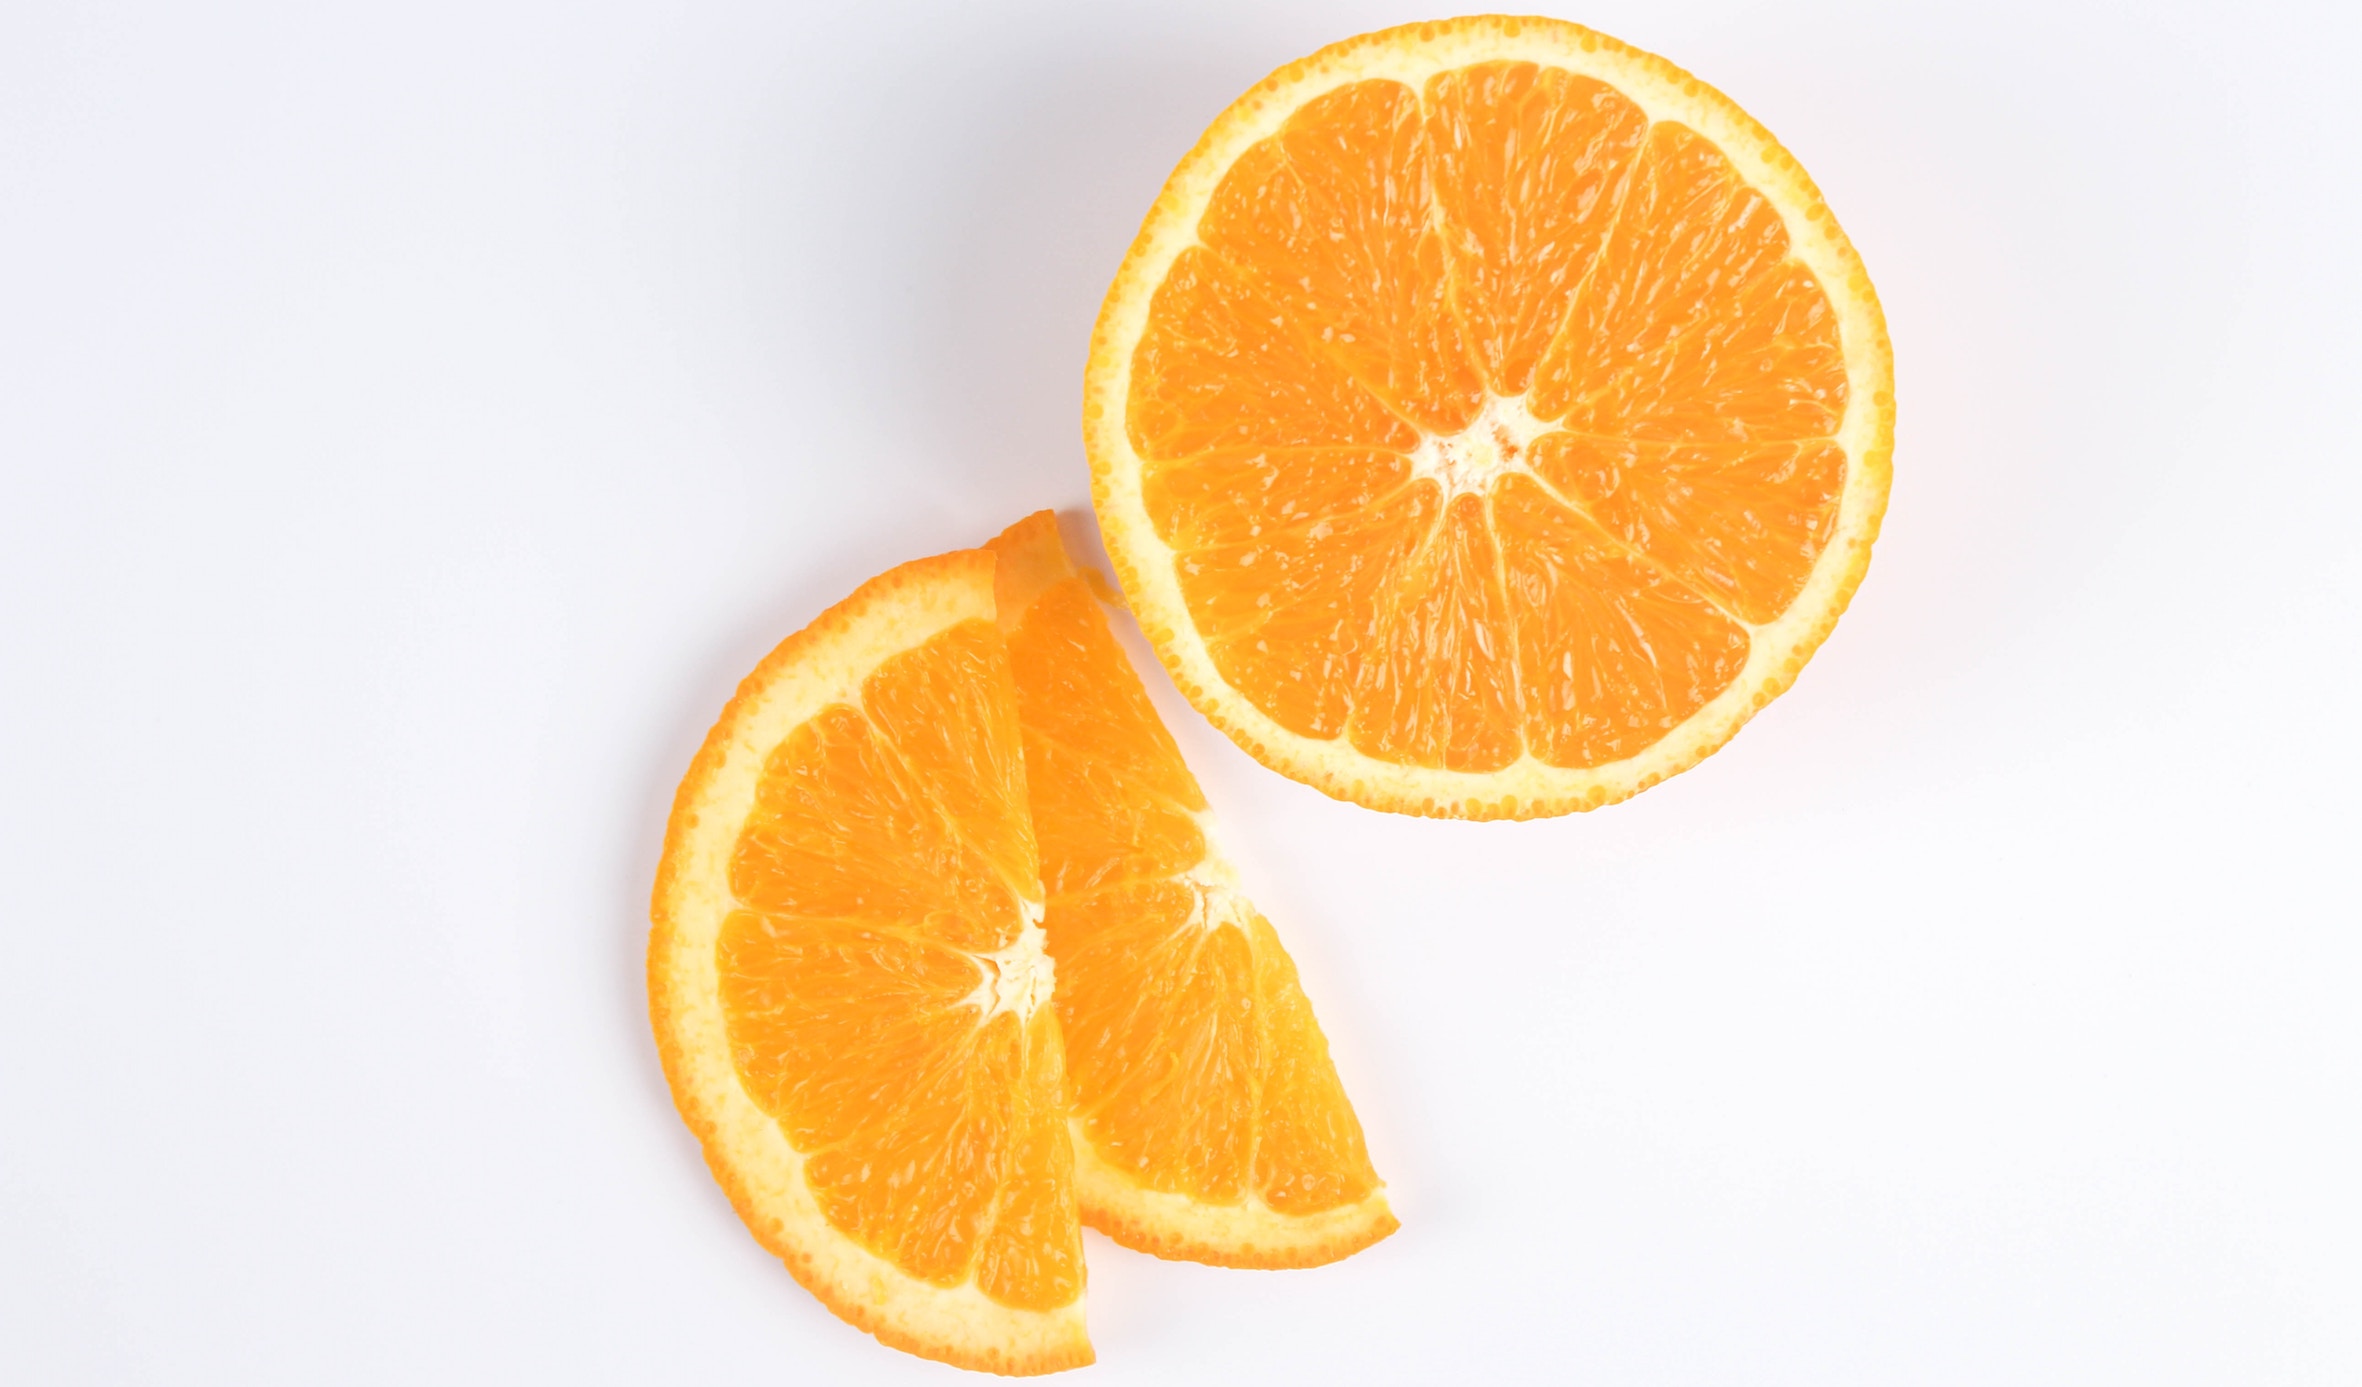 A sliced orange - Photo by Chang Duong on Unsplash